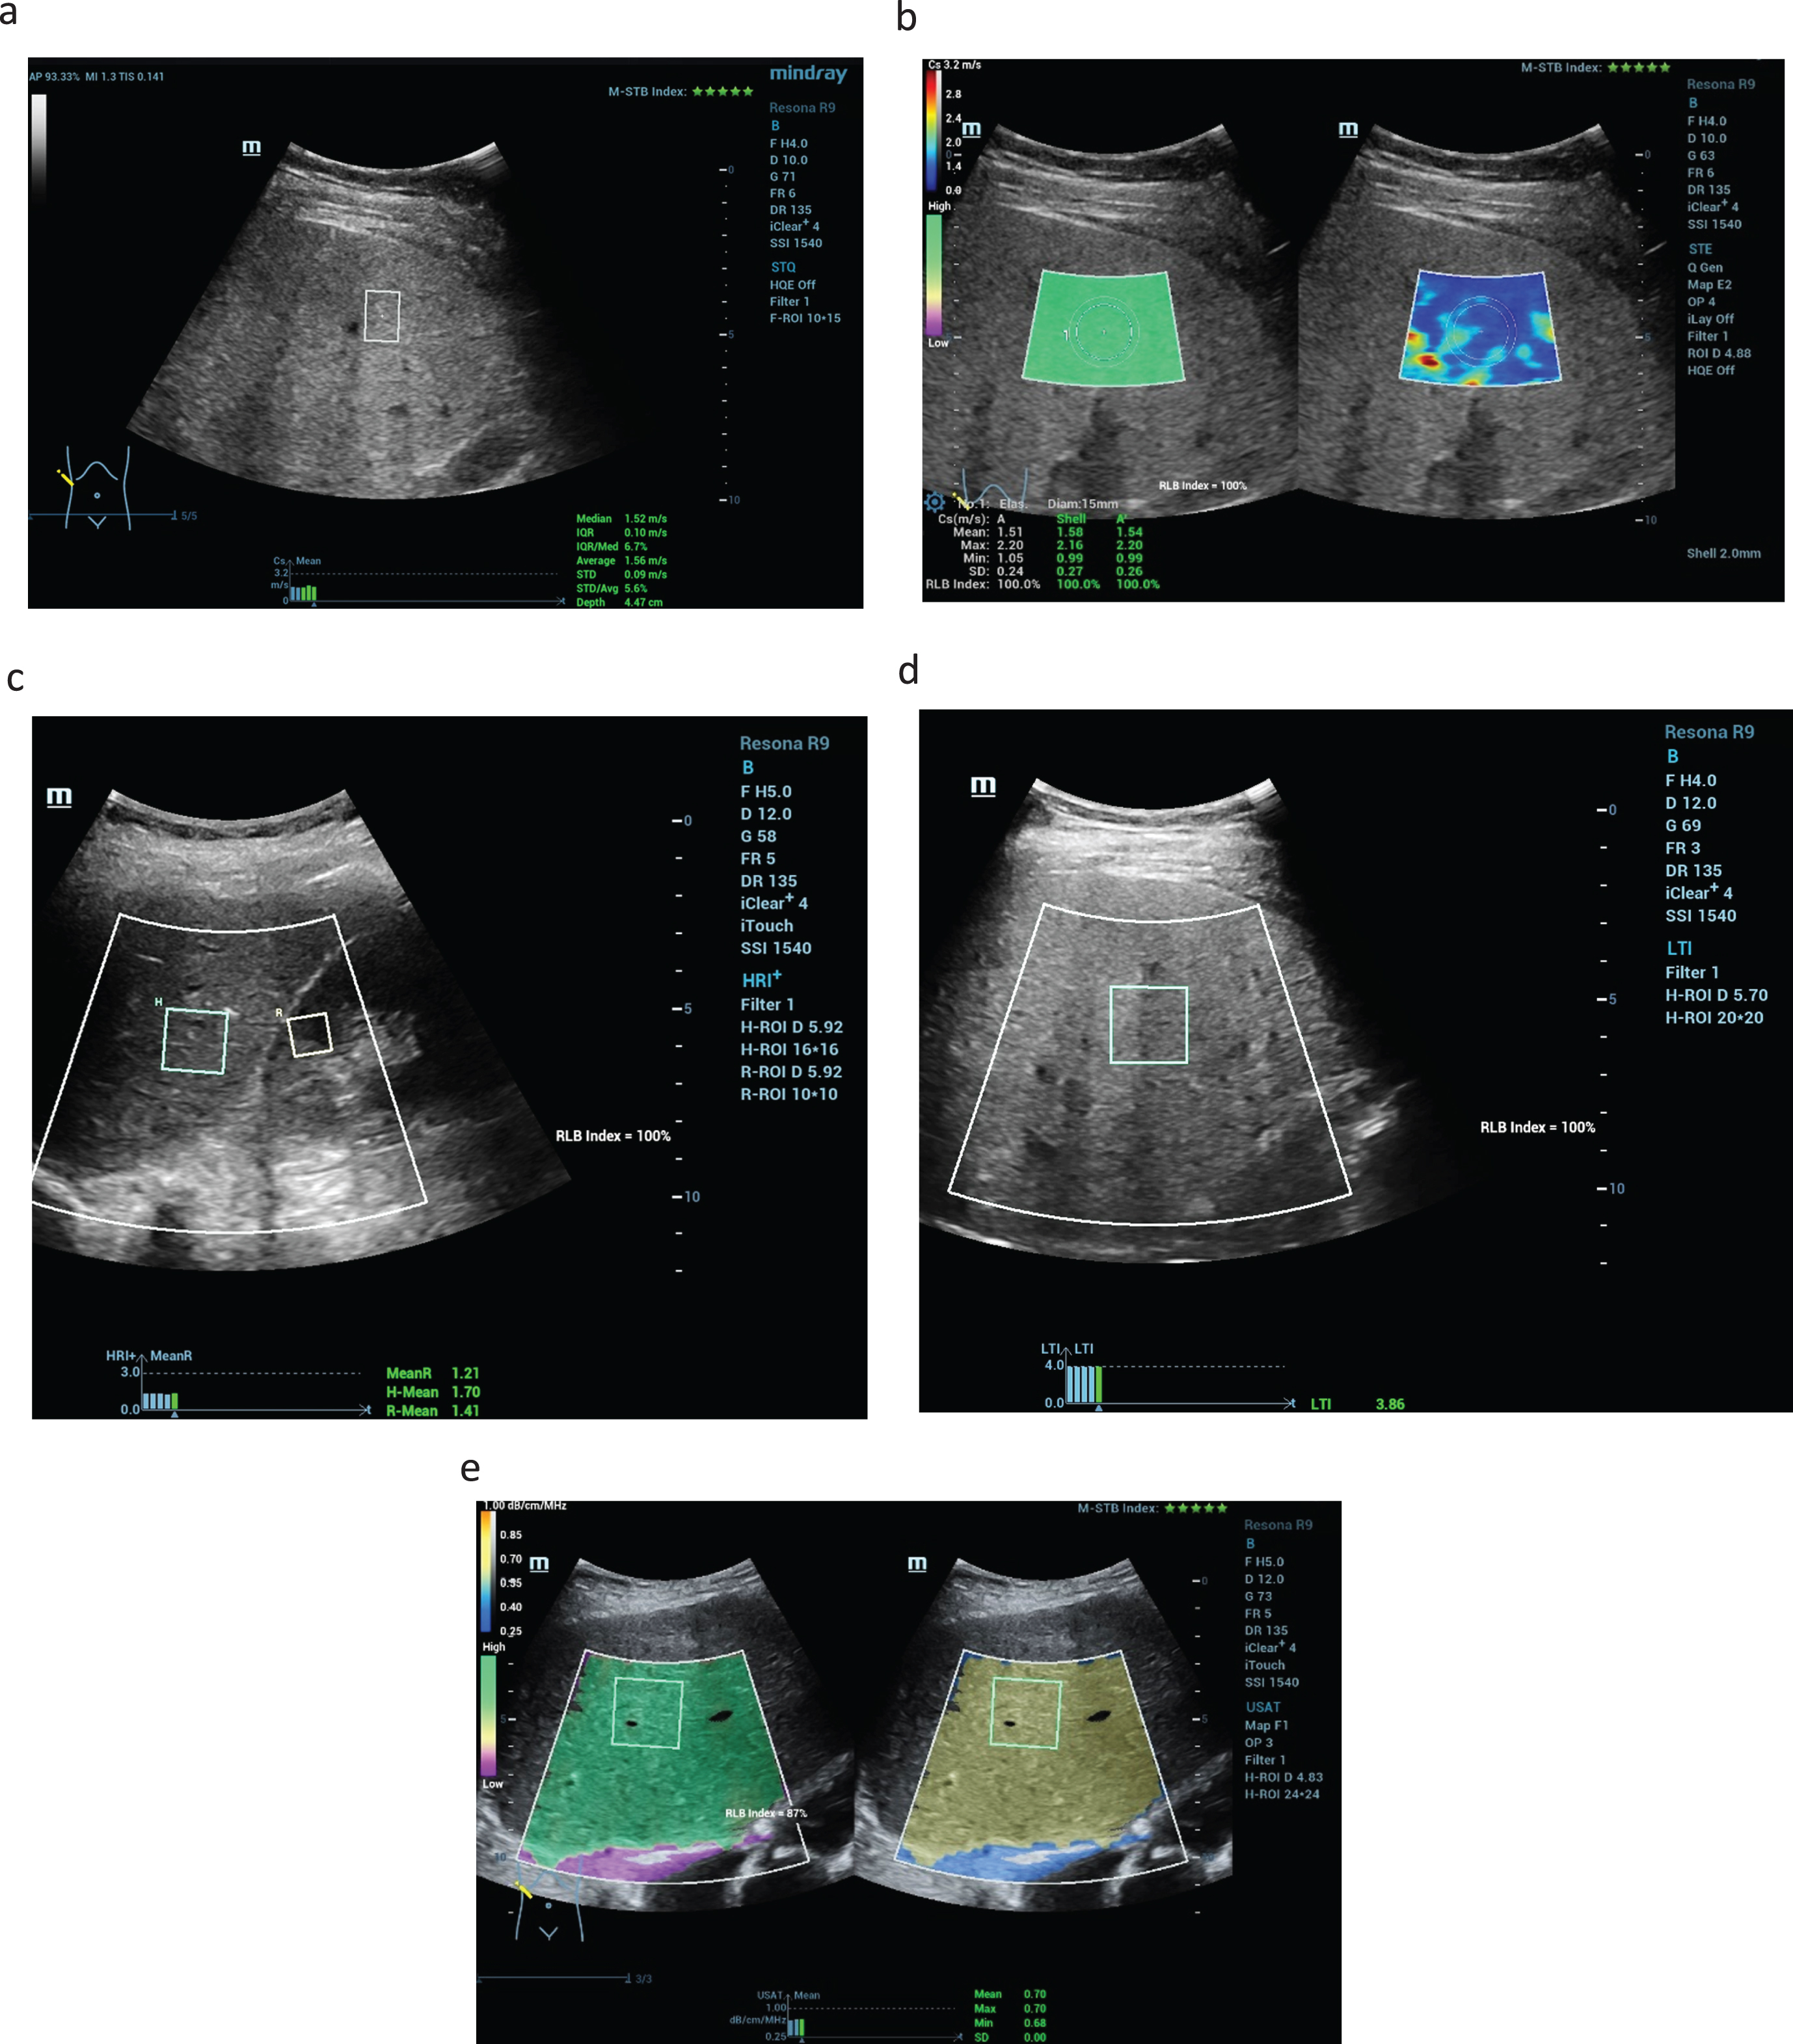 New ultrasound modalities of non-invasive evaluation of the liver stiffness in a case of F1 fibrosis up to 1.5 m/s (a), color-coded shear wave technique with high image quality (5 green stars) with blue and less yellow colors parts as a sign of less liver stiffness (b). Using the new liver tissue technologies the parenchymal comparison from kidney cortex and liver tissue is possible with values > 1,2 (HRI+) and values up to 0.7 dB/cm/MHz for the liver fatty measurements (USAT) (c). LTI measurements with values up to 3.8 after chronic inflammatory reaction (d). High image quality of 100% and 5 stars in all case (e).